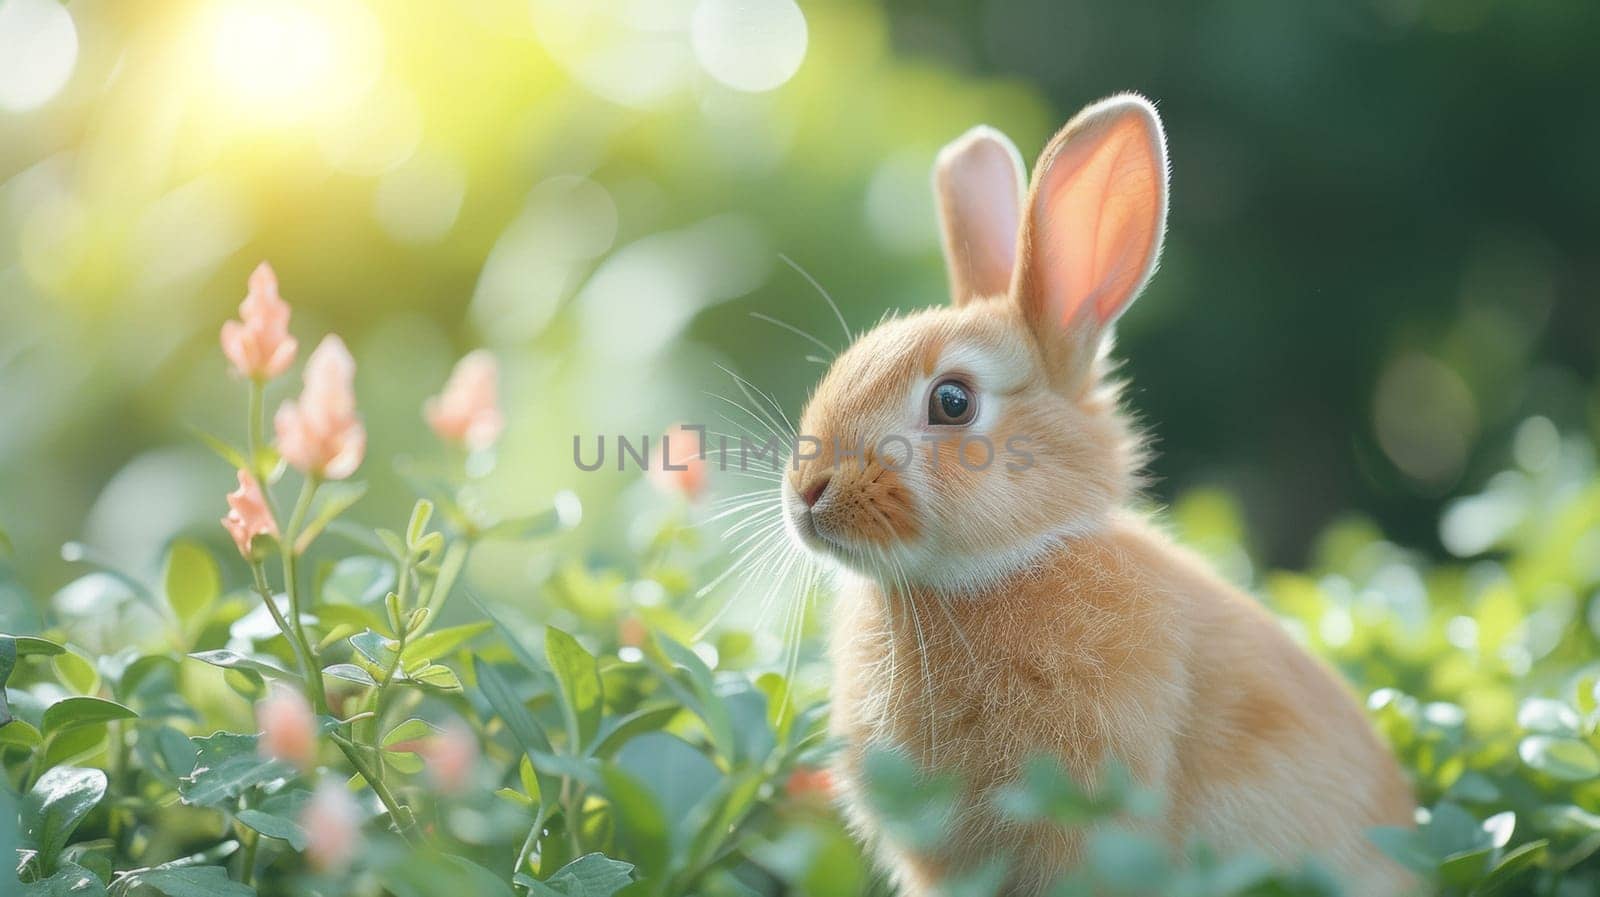 A small rabbit sitting in a field of flowers with green grass